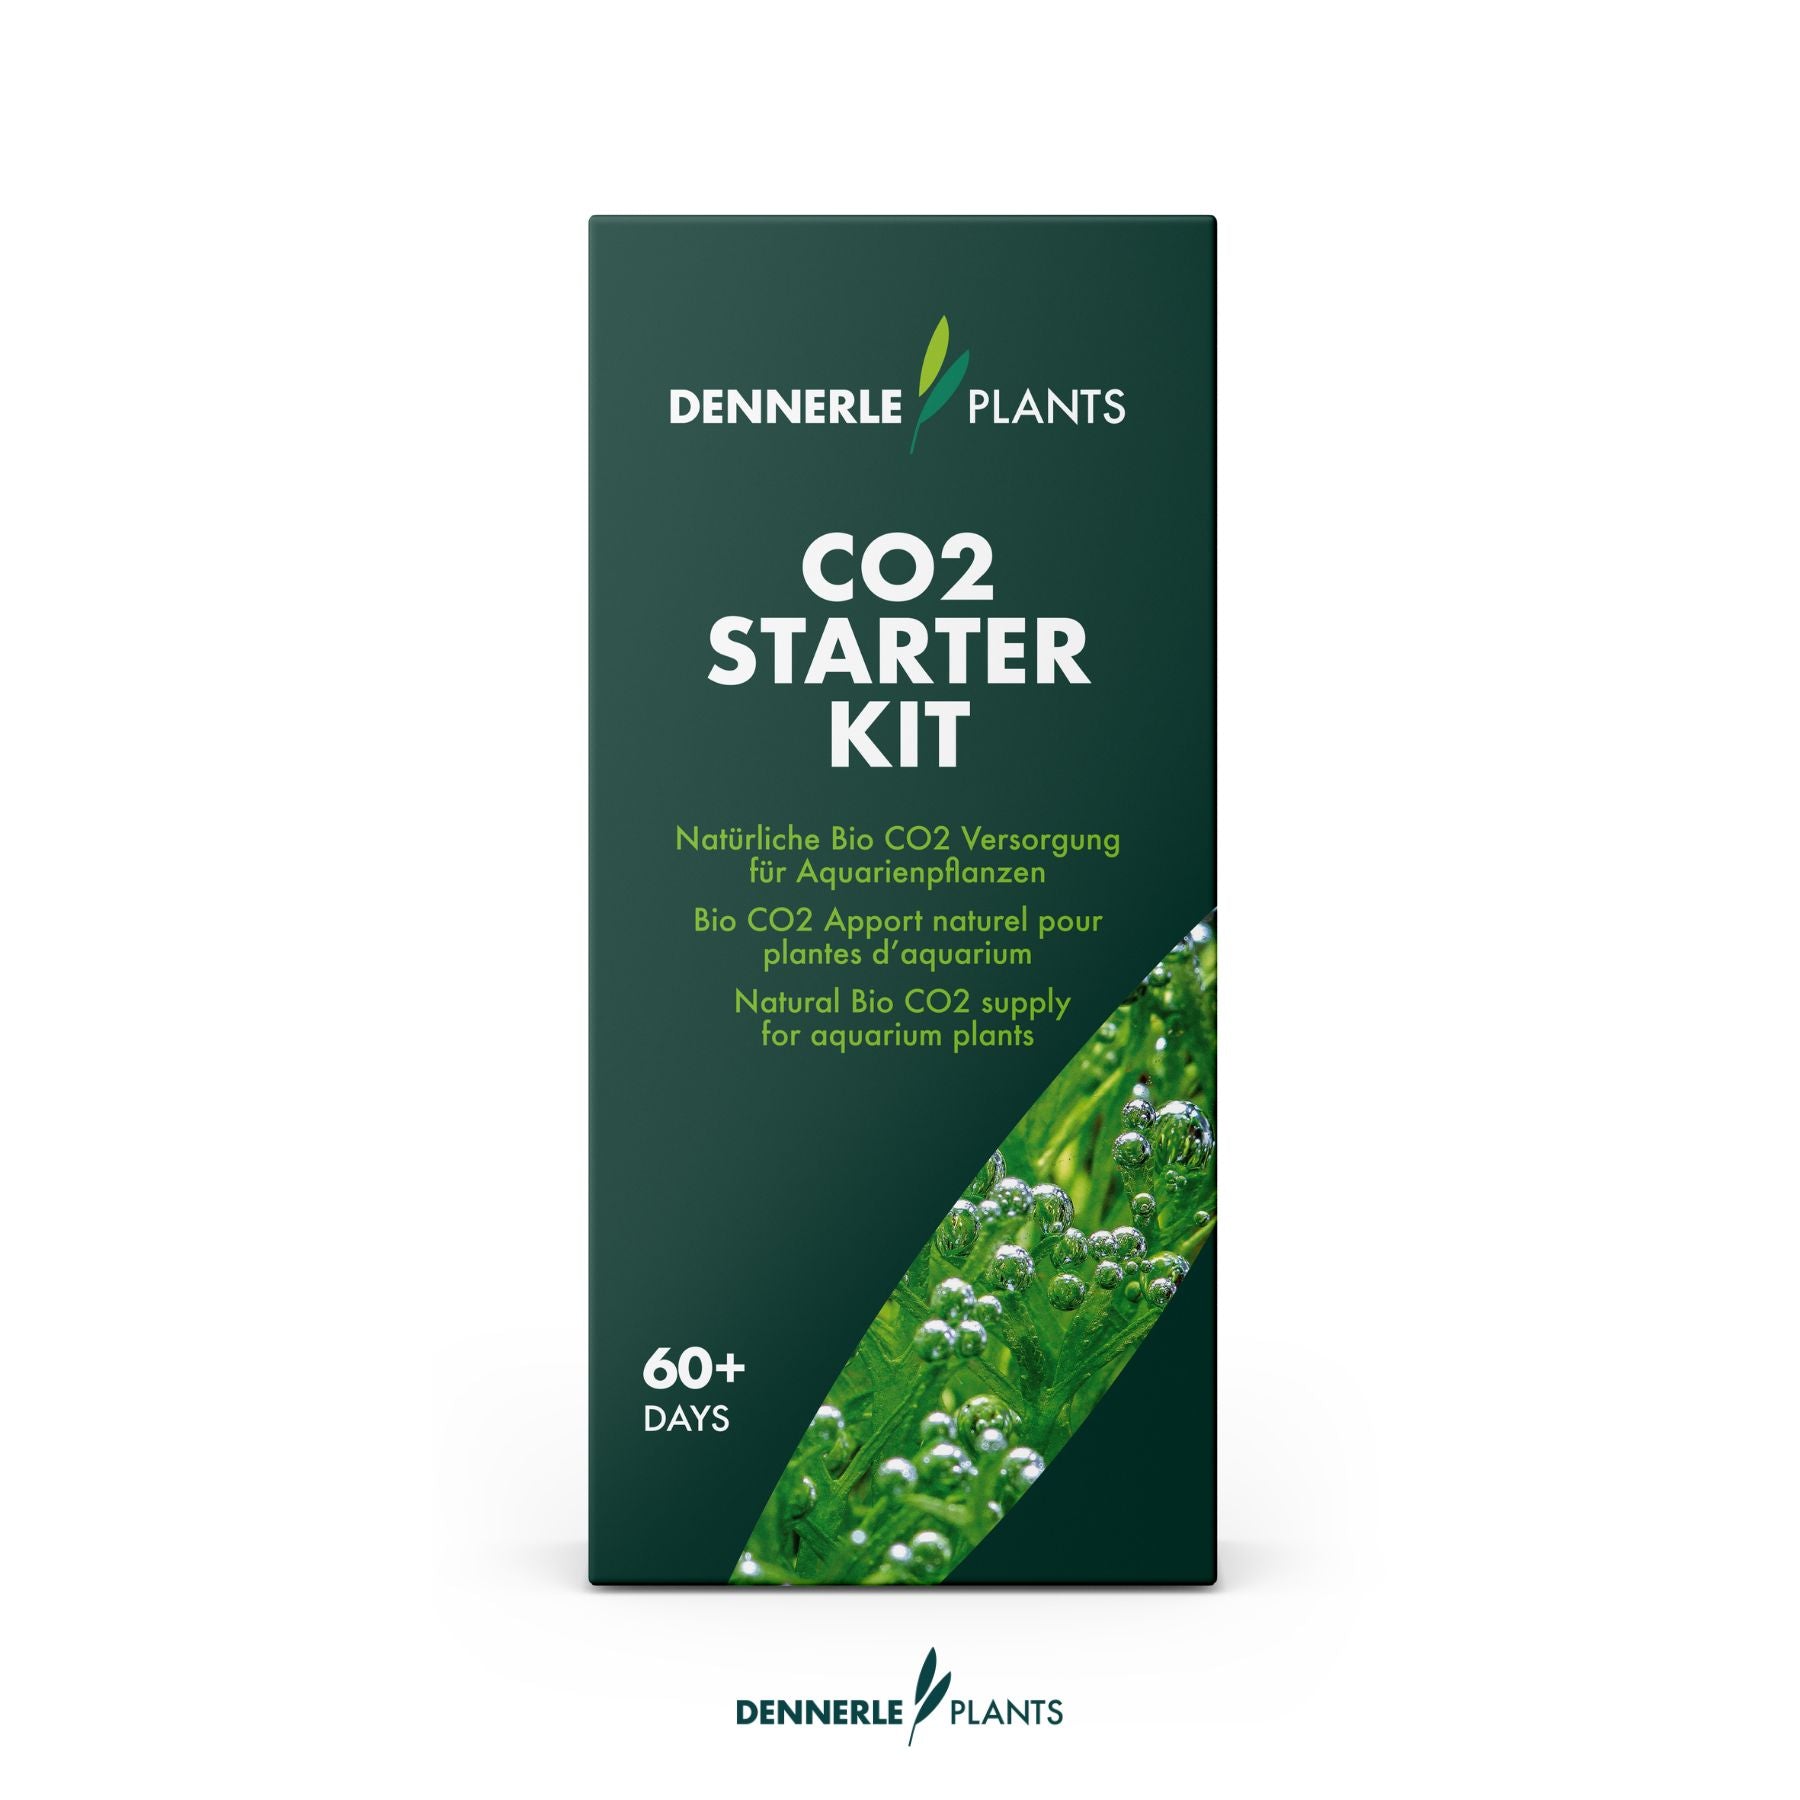 Product picture of Dennerle Plants CO2 Starter Kit